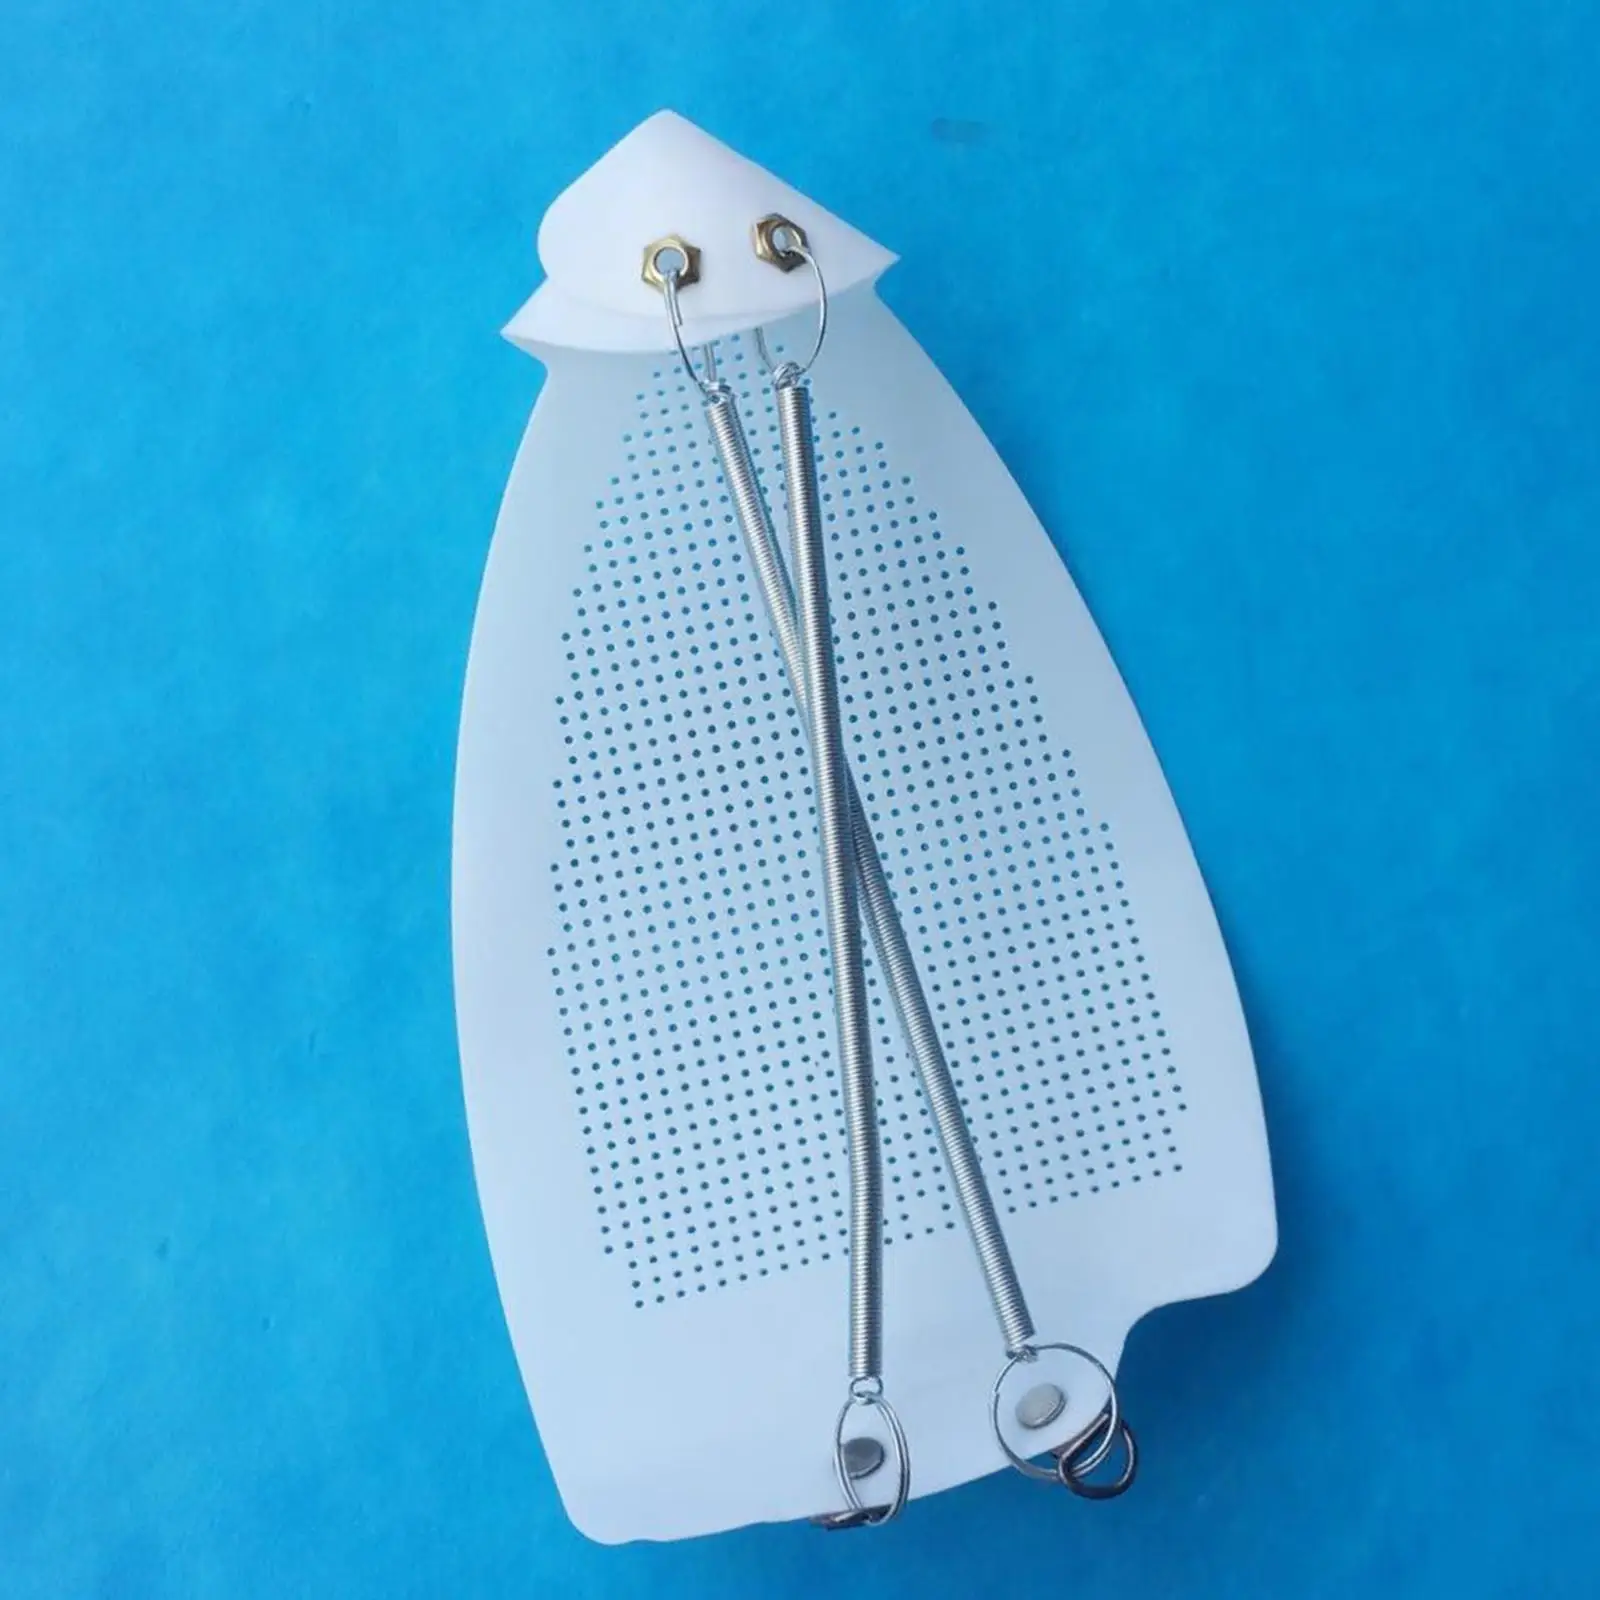 Universal Iron Shoe Cover Ironing Aid Assistant Tool Steam Iron Shoe Iron Sole Multifunctional